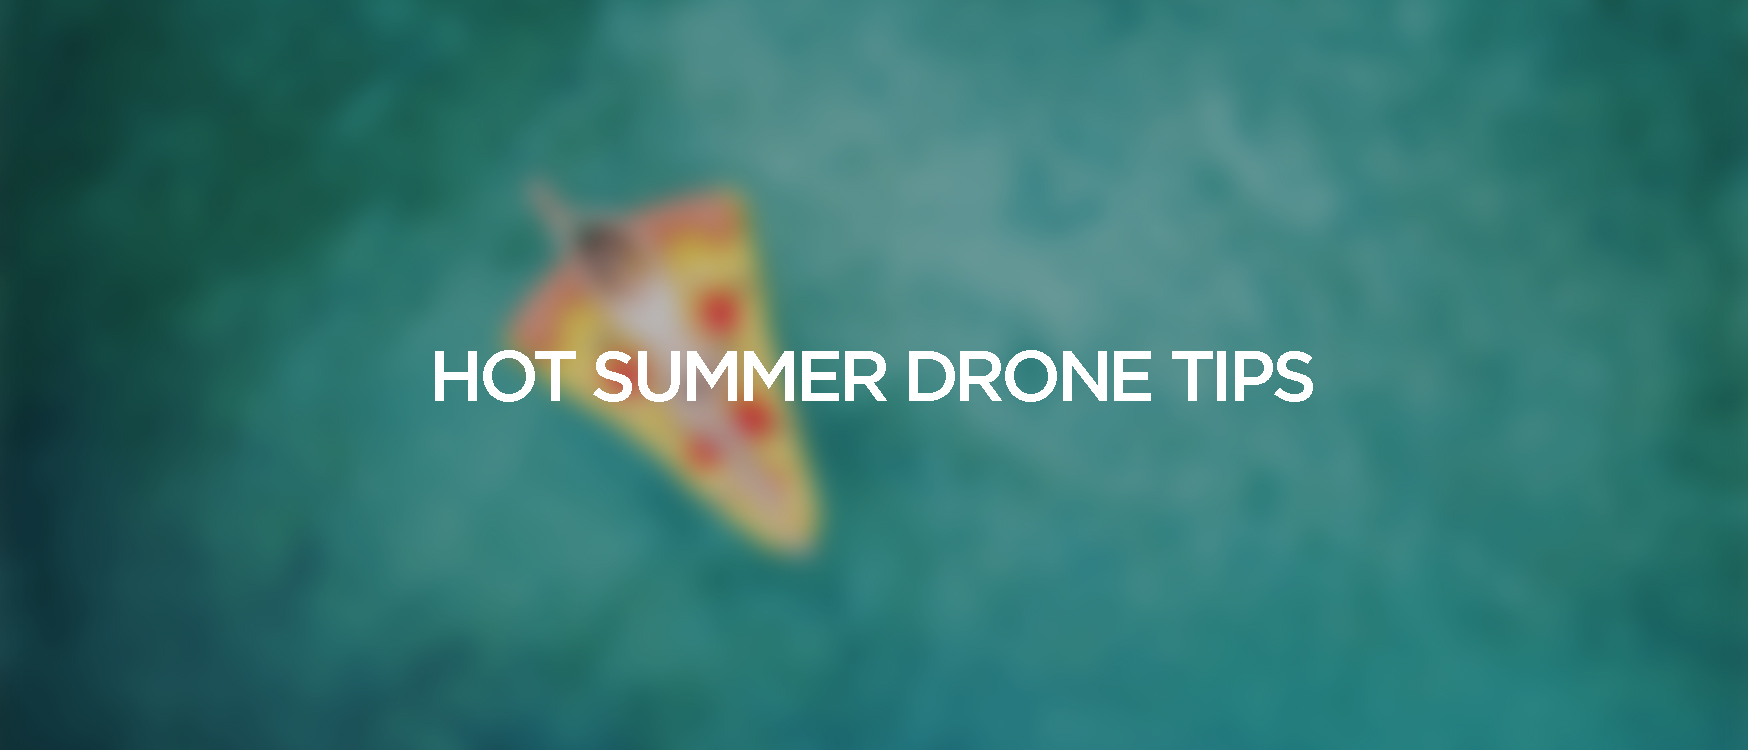 Drone Tips For Flying In Summer